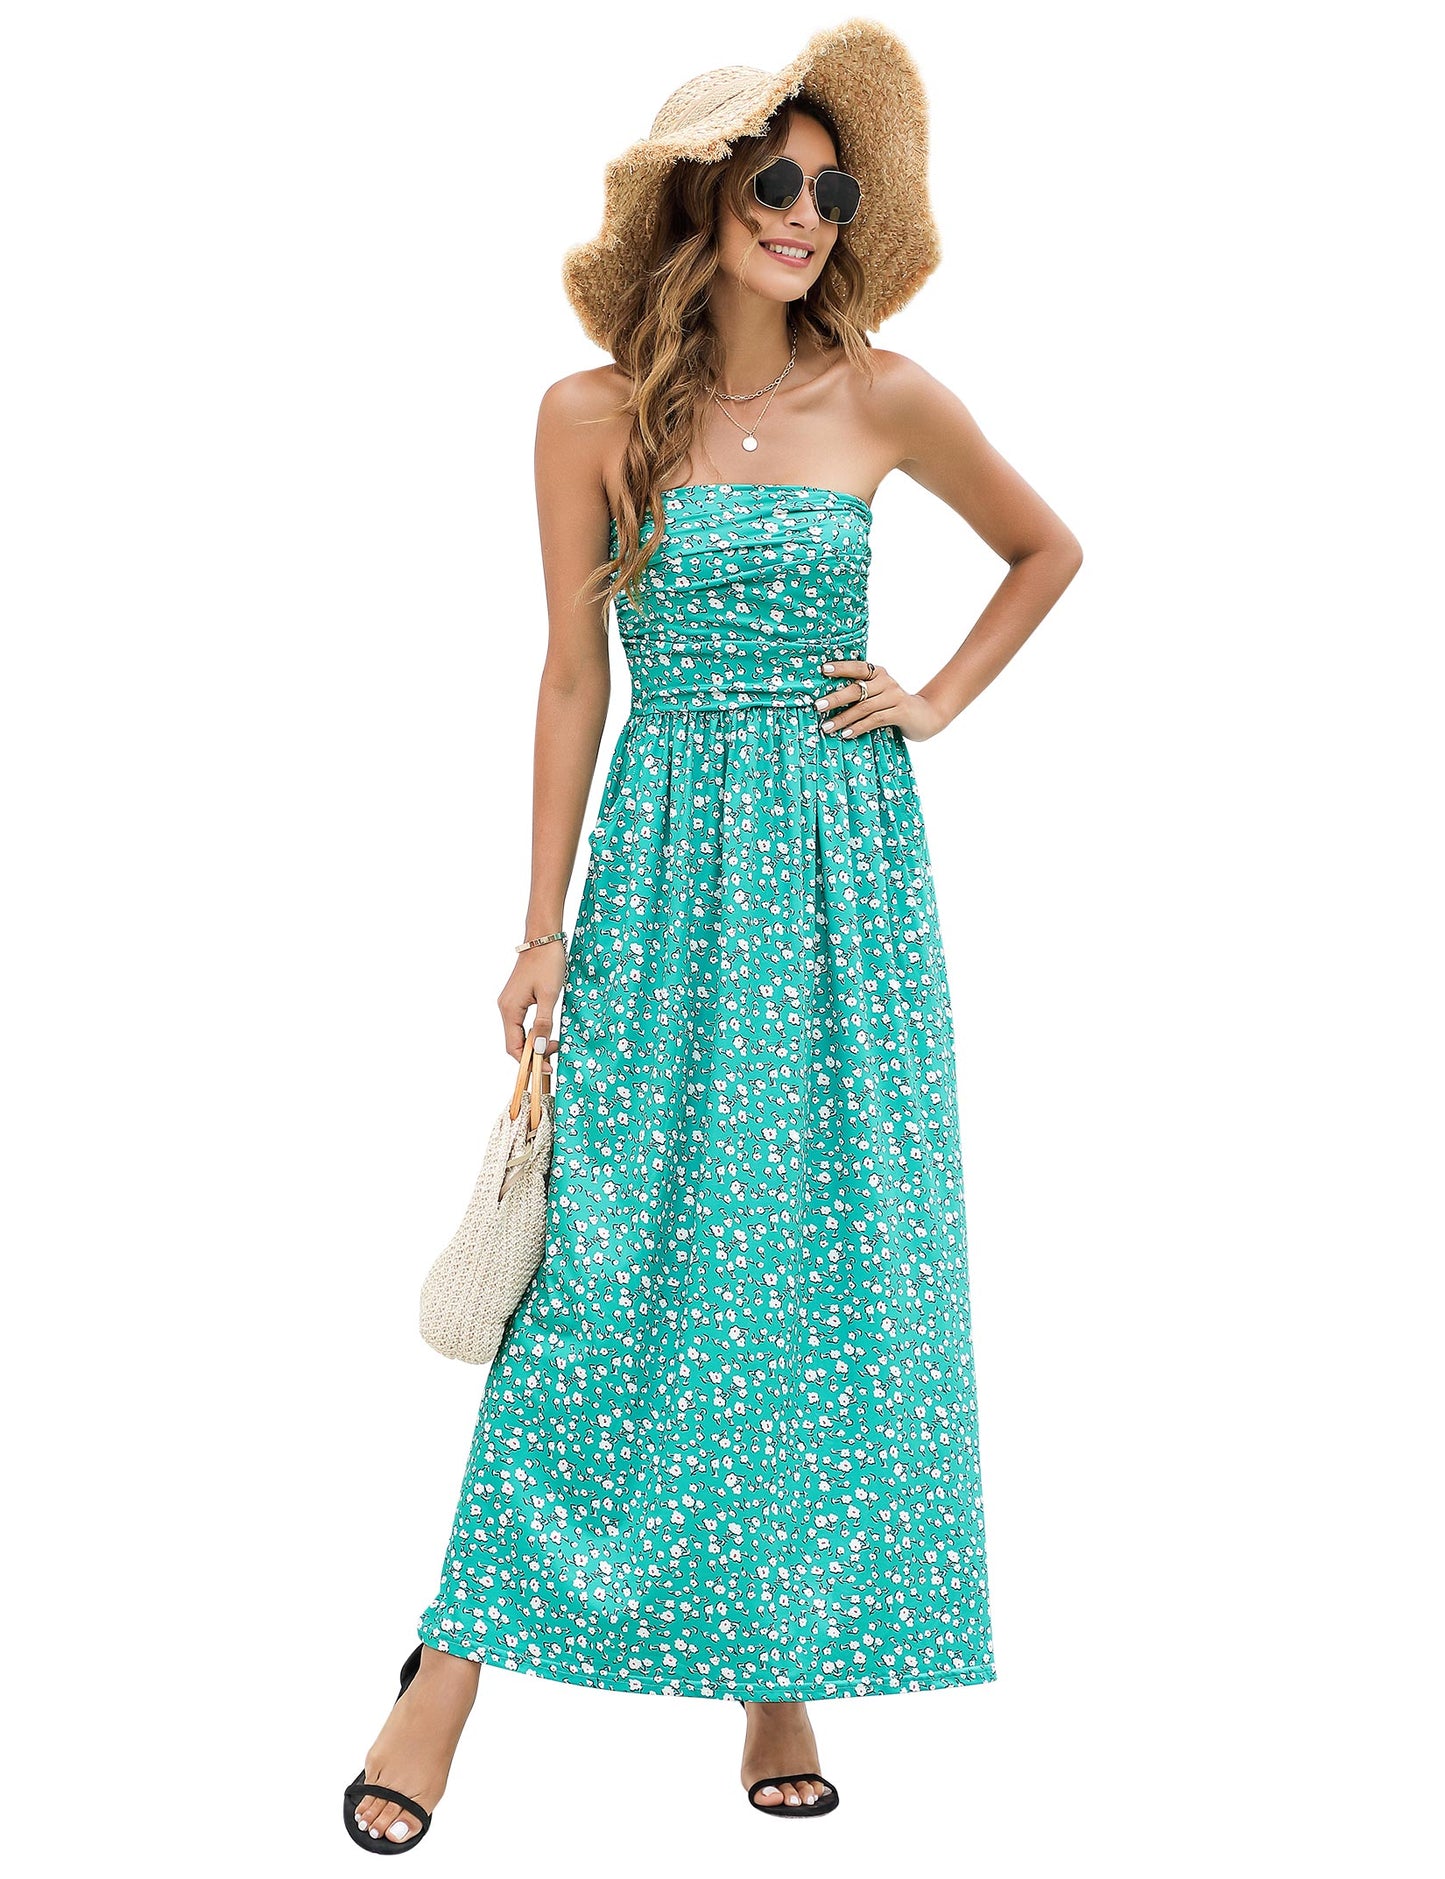 YESFASHION Women's Strapless Graceful Floral Maxi Long Dress